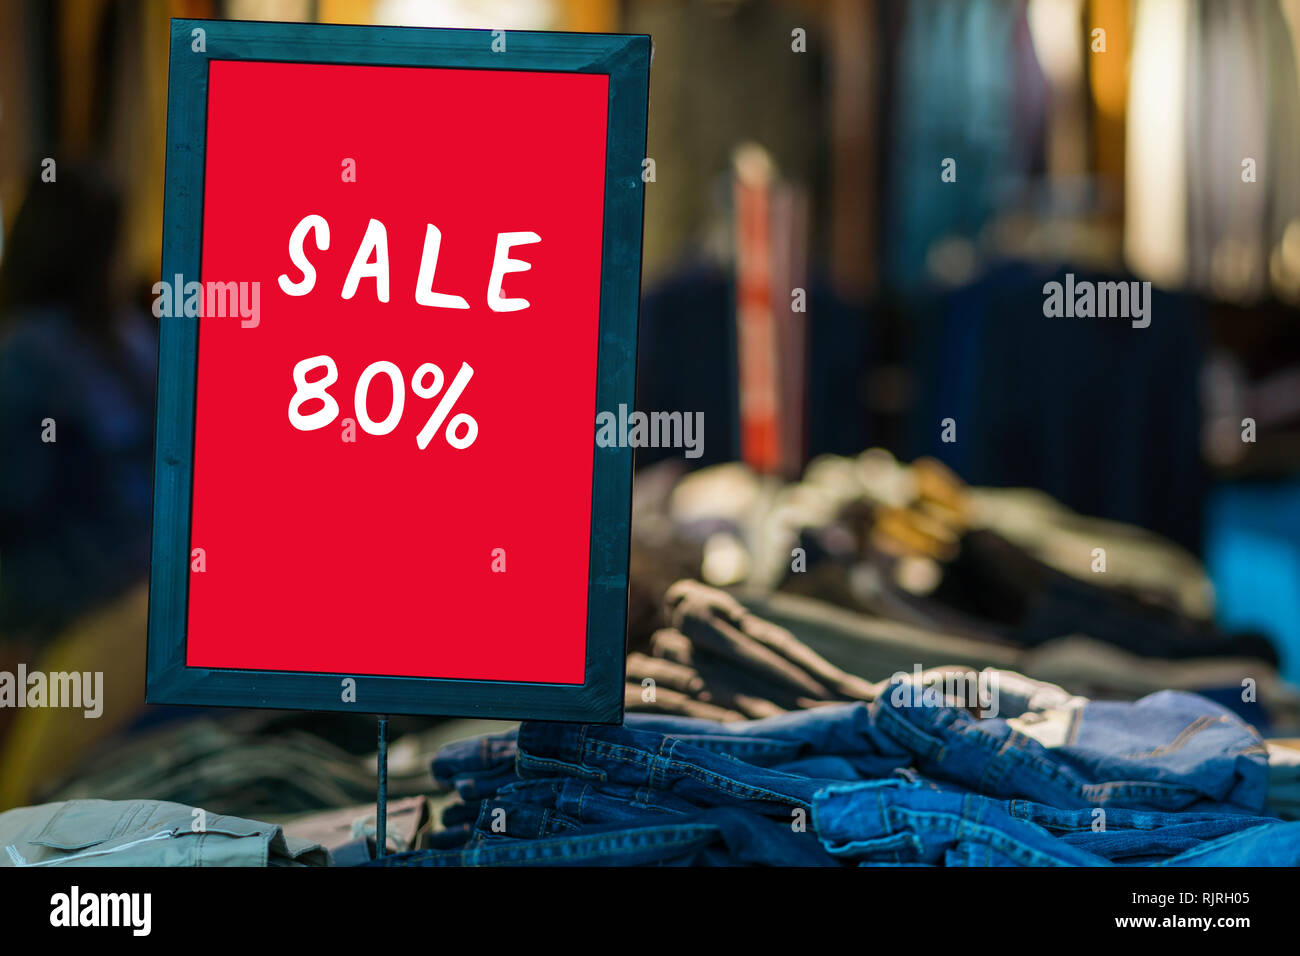 sale 80 off mock up advertise display frame setting over the bucket jeans in the shopping department store for shopping, business fashion and advertis Stock Photo